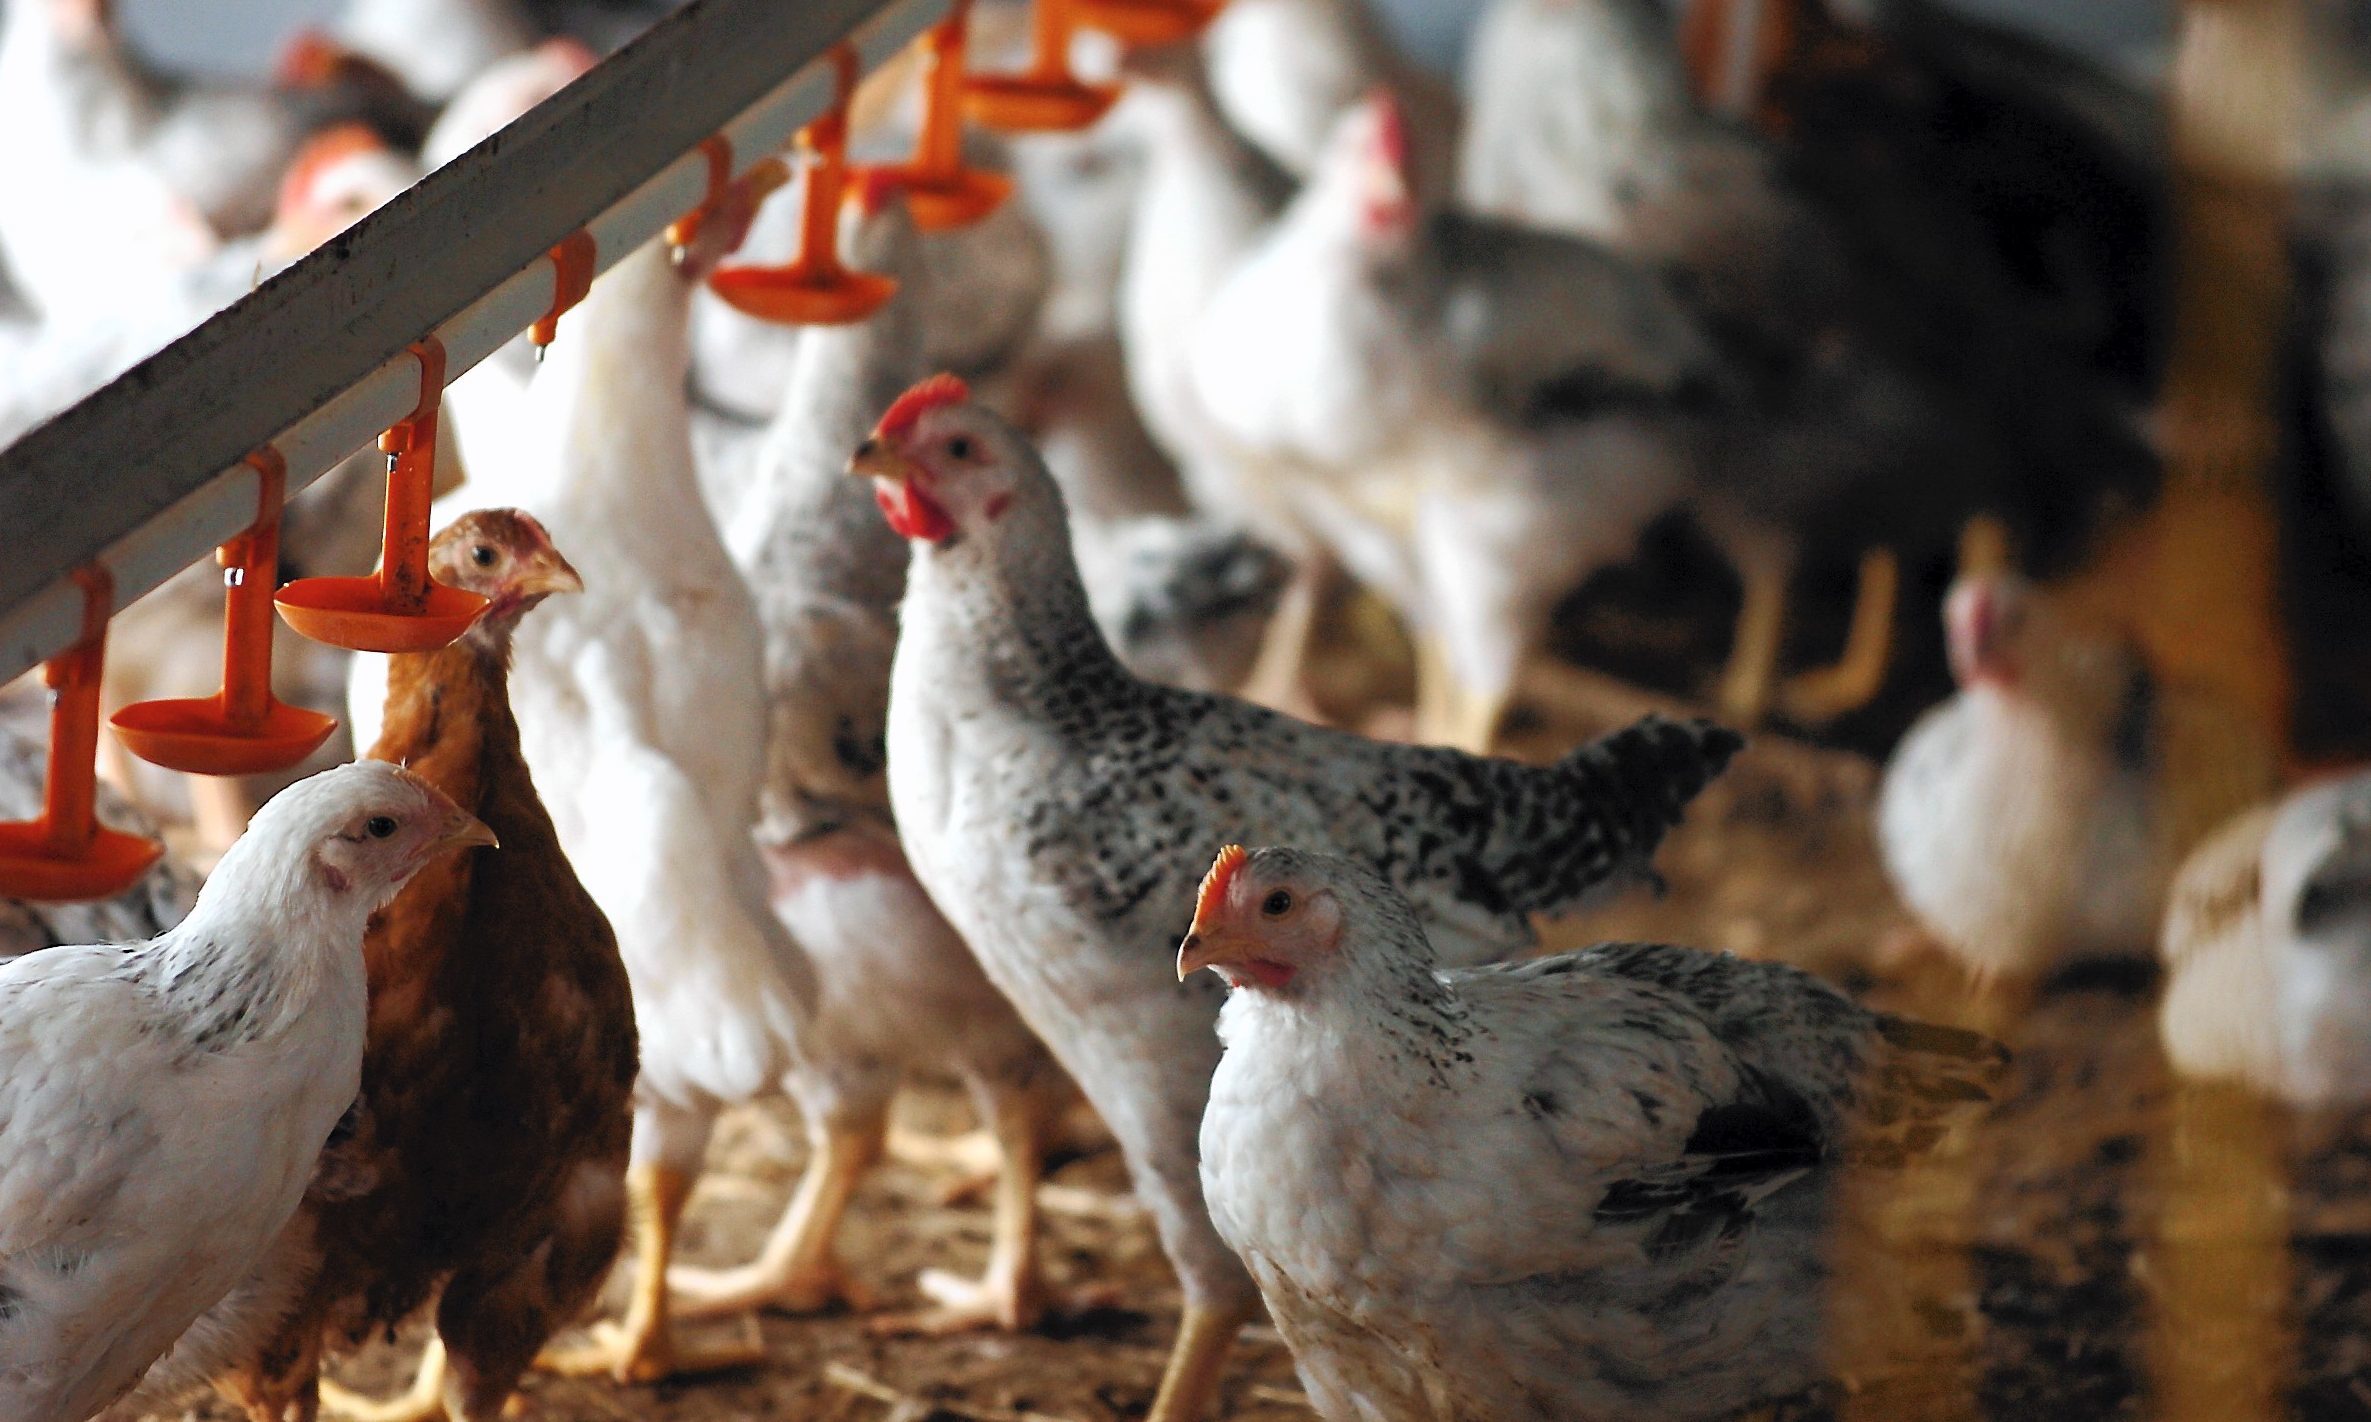 The chicken farm plan has provoked controversy.